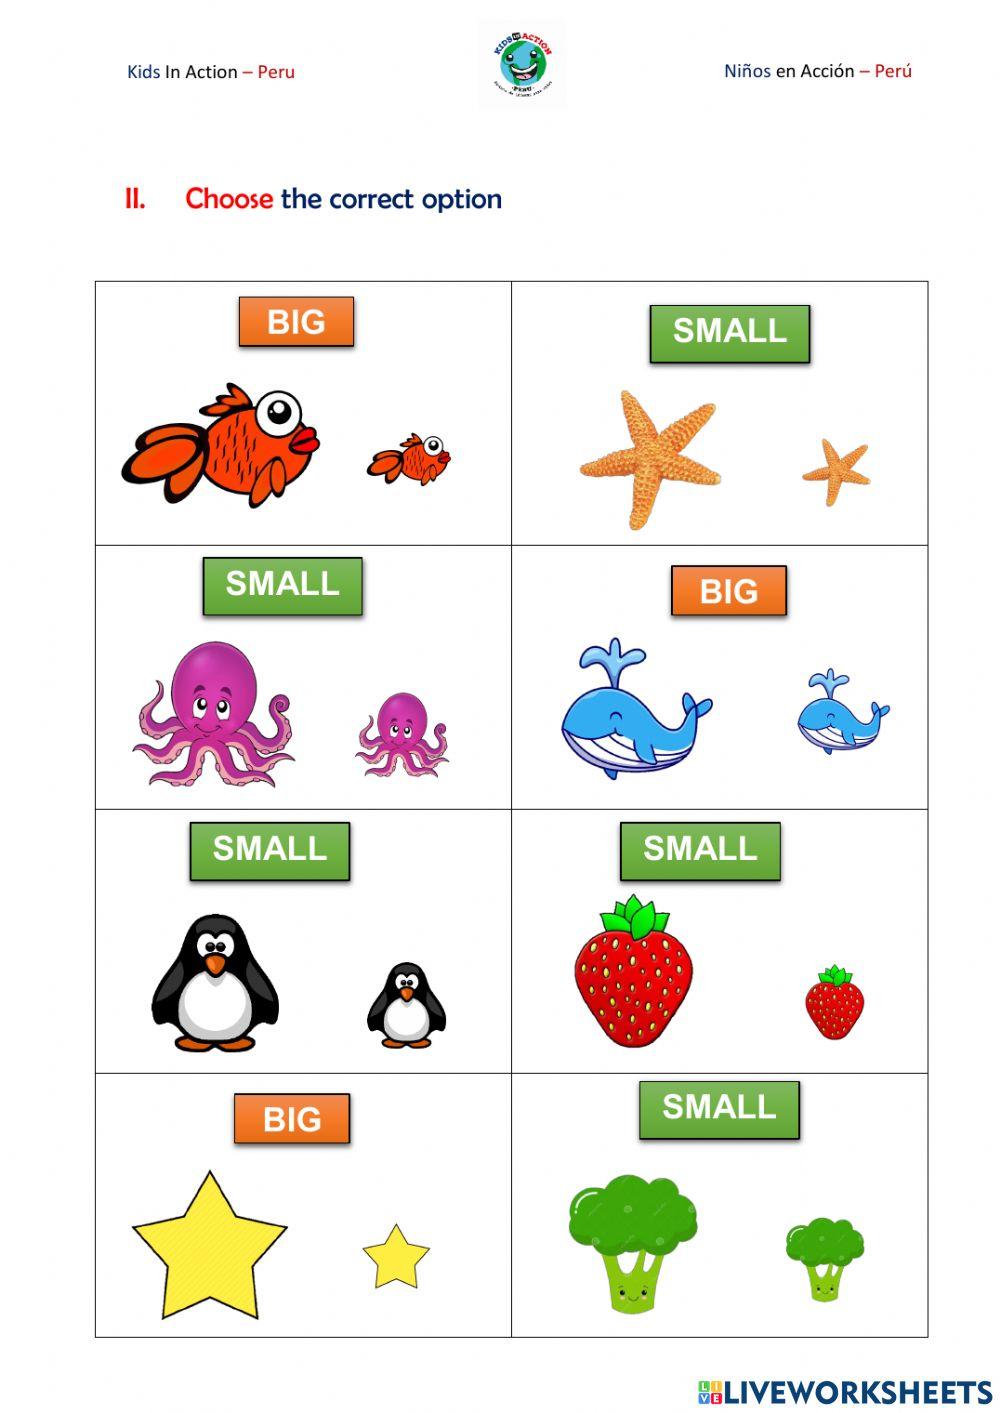 Big and Small  Live Worksheets